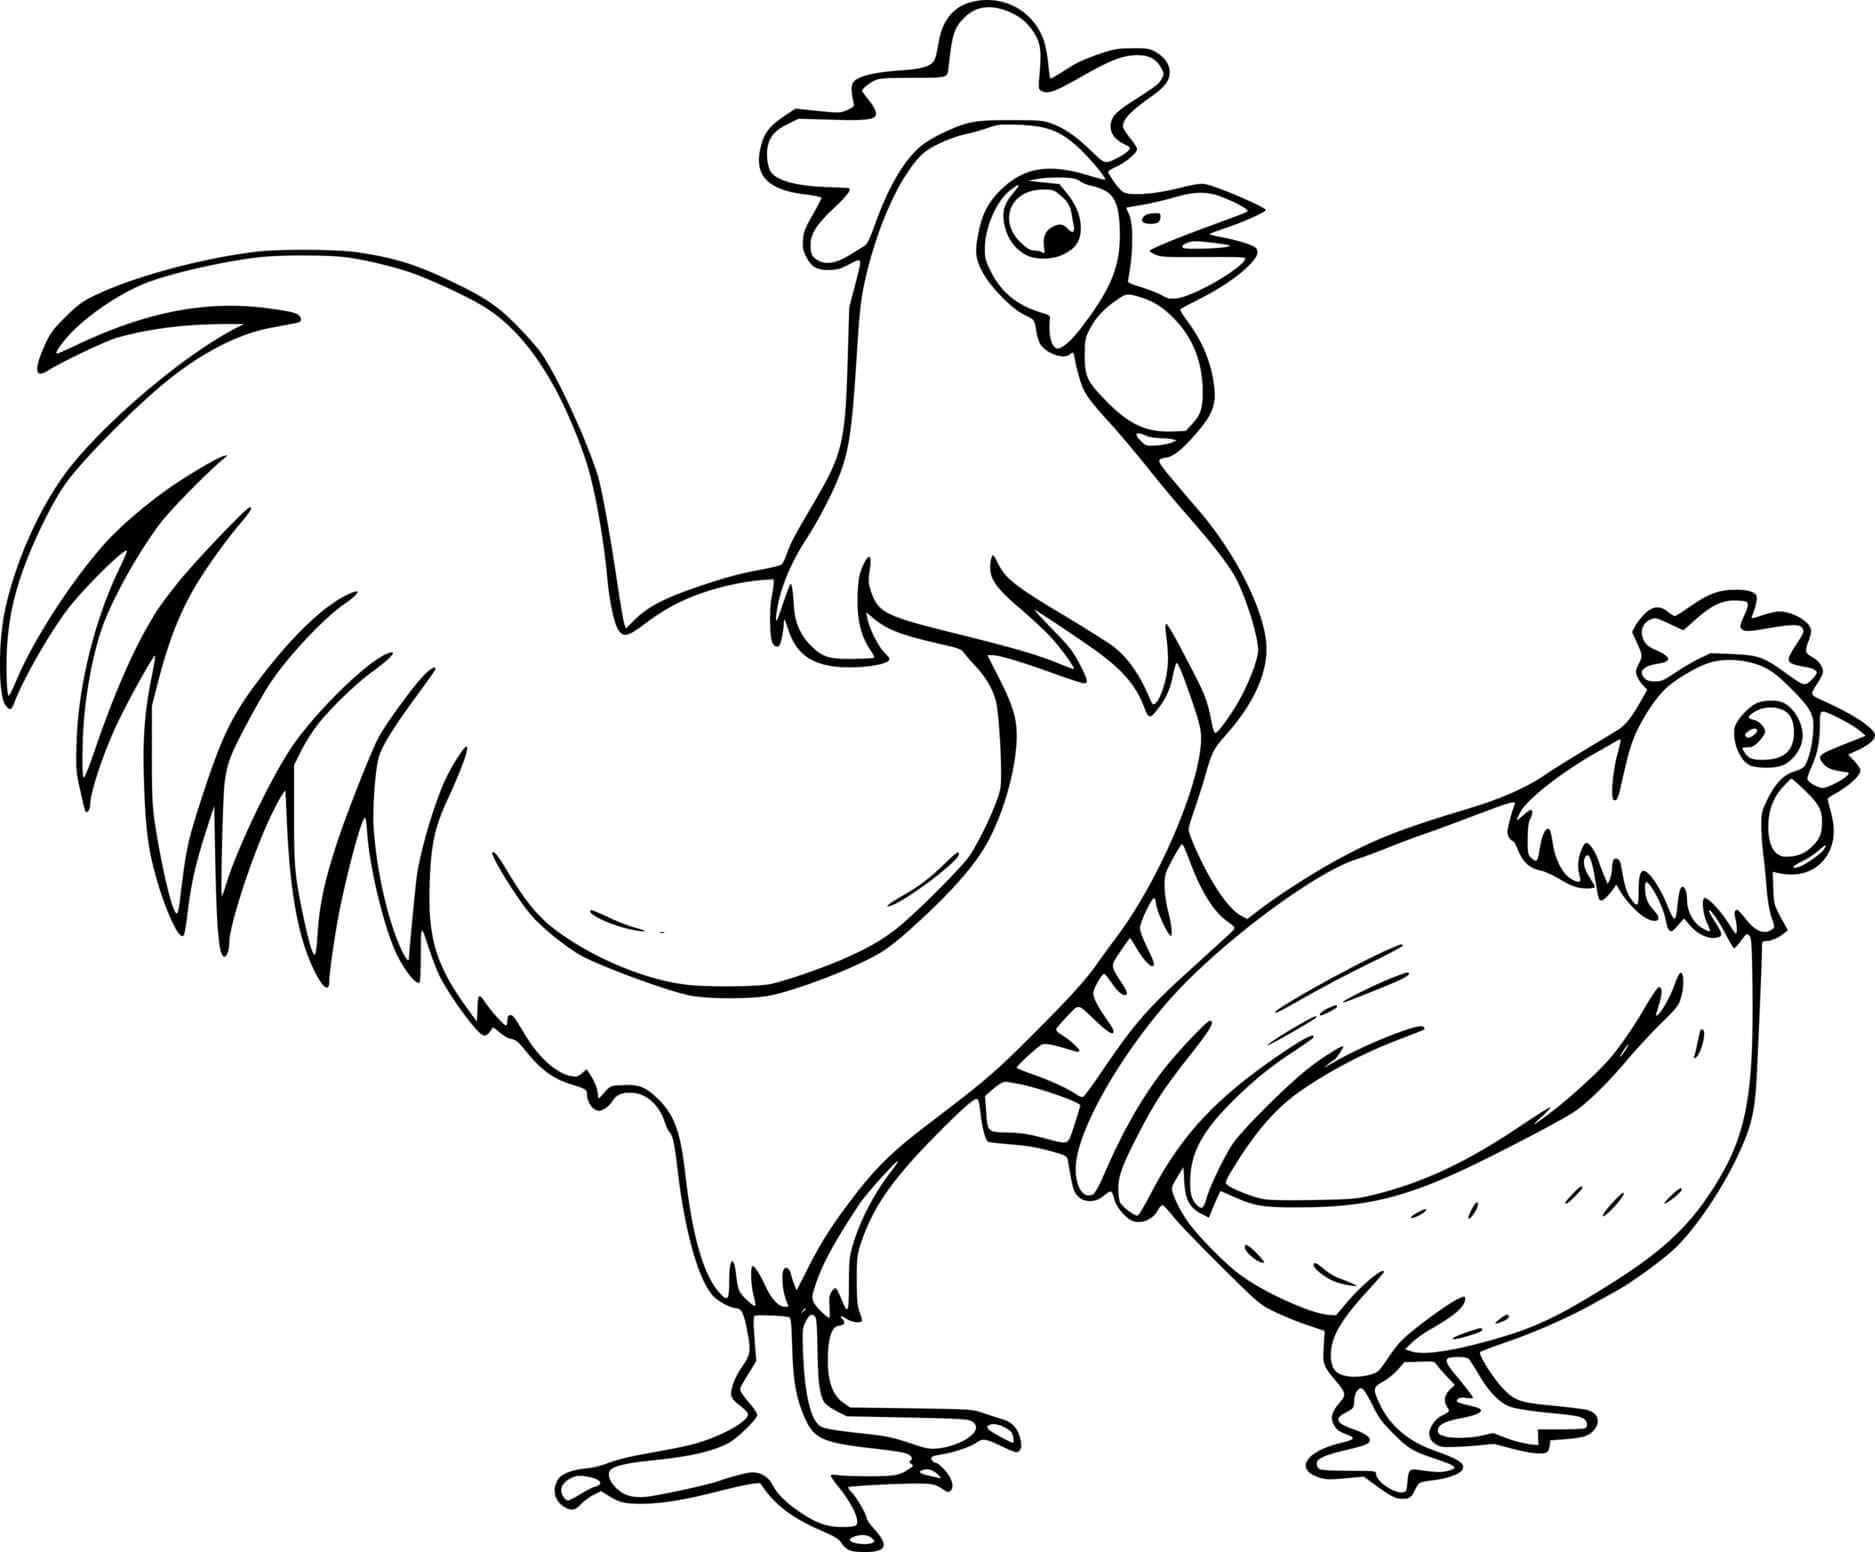 A Rooster And A Hen